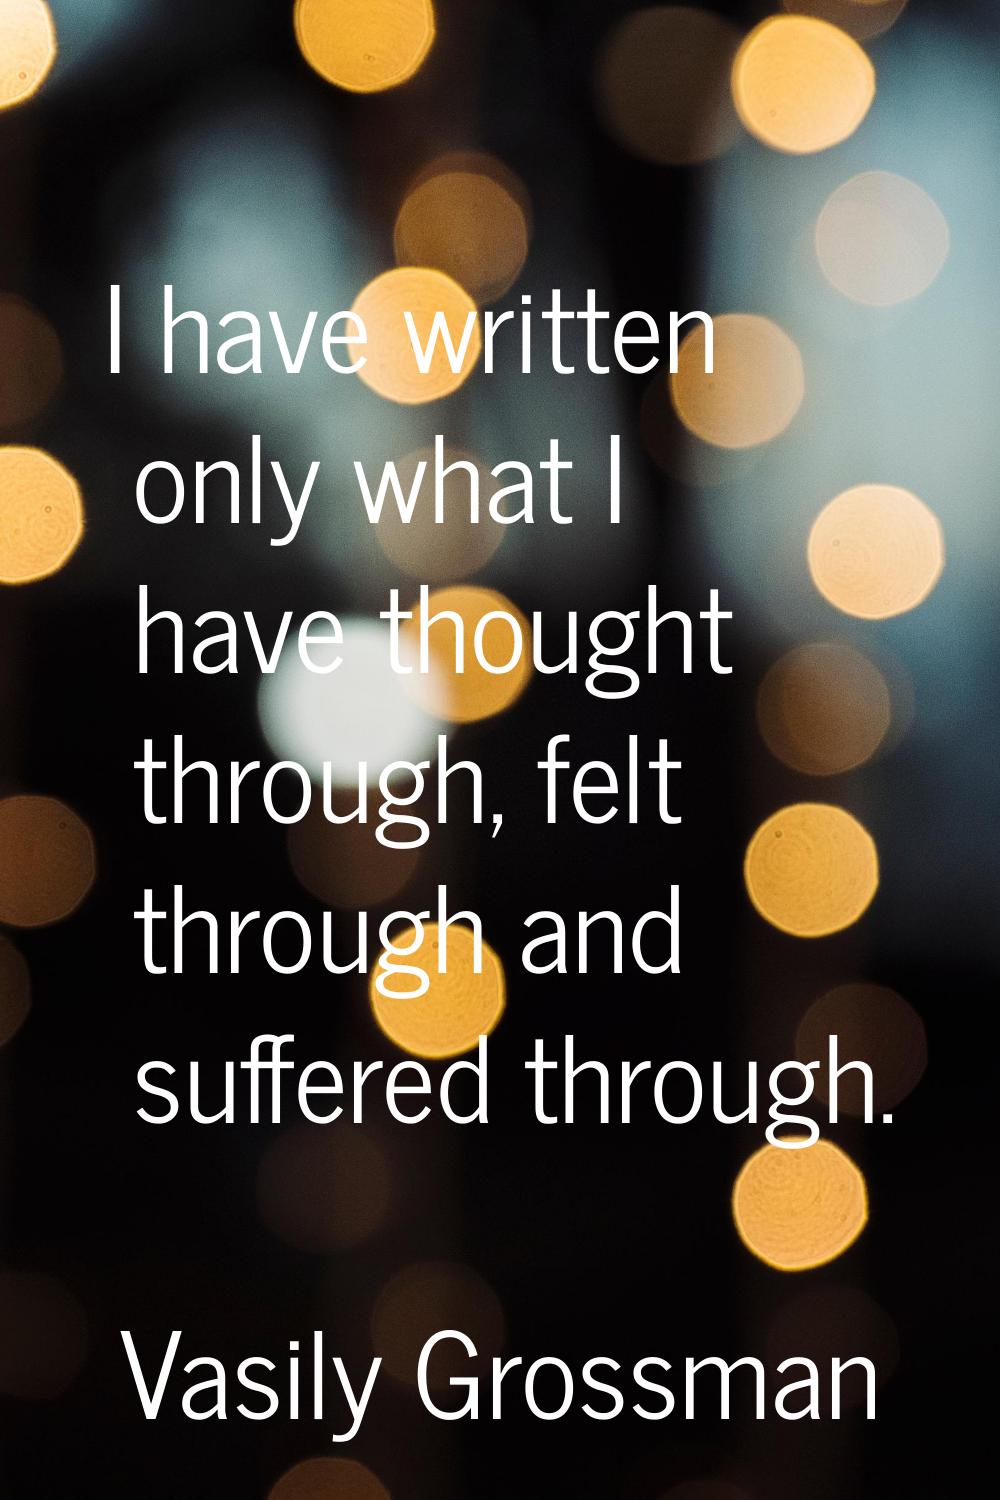 I have written only what I have thought through, felt through and suffered through.